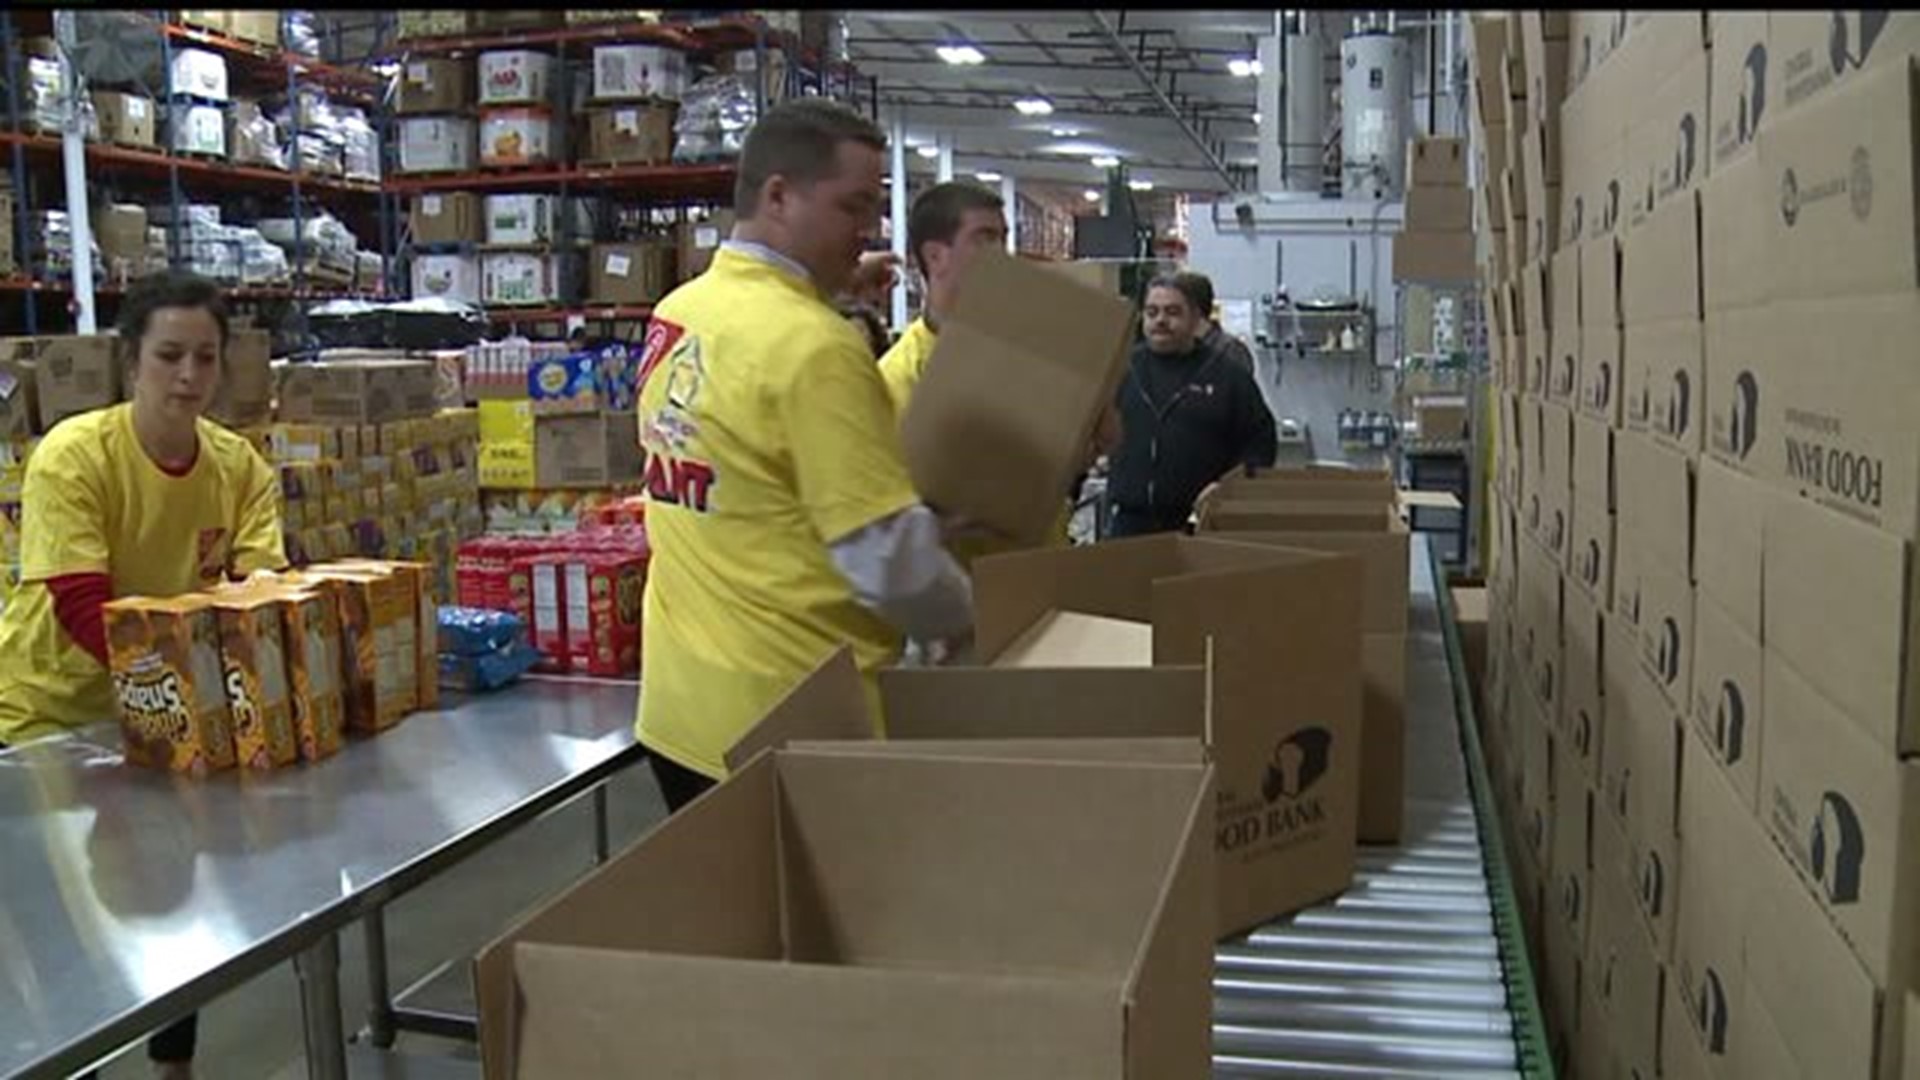 The Central Pennsylvania Food Bank is preparing and collecting donations for those in need this holiday season